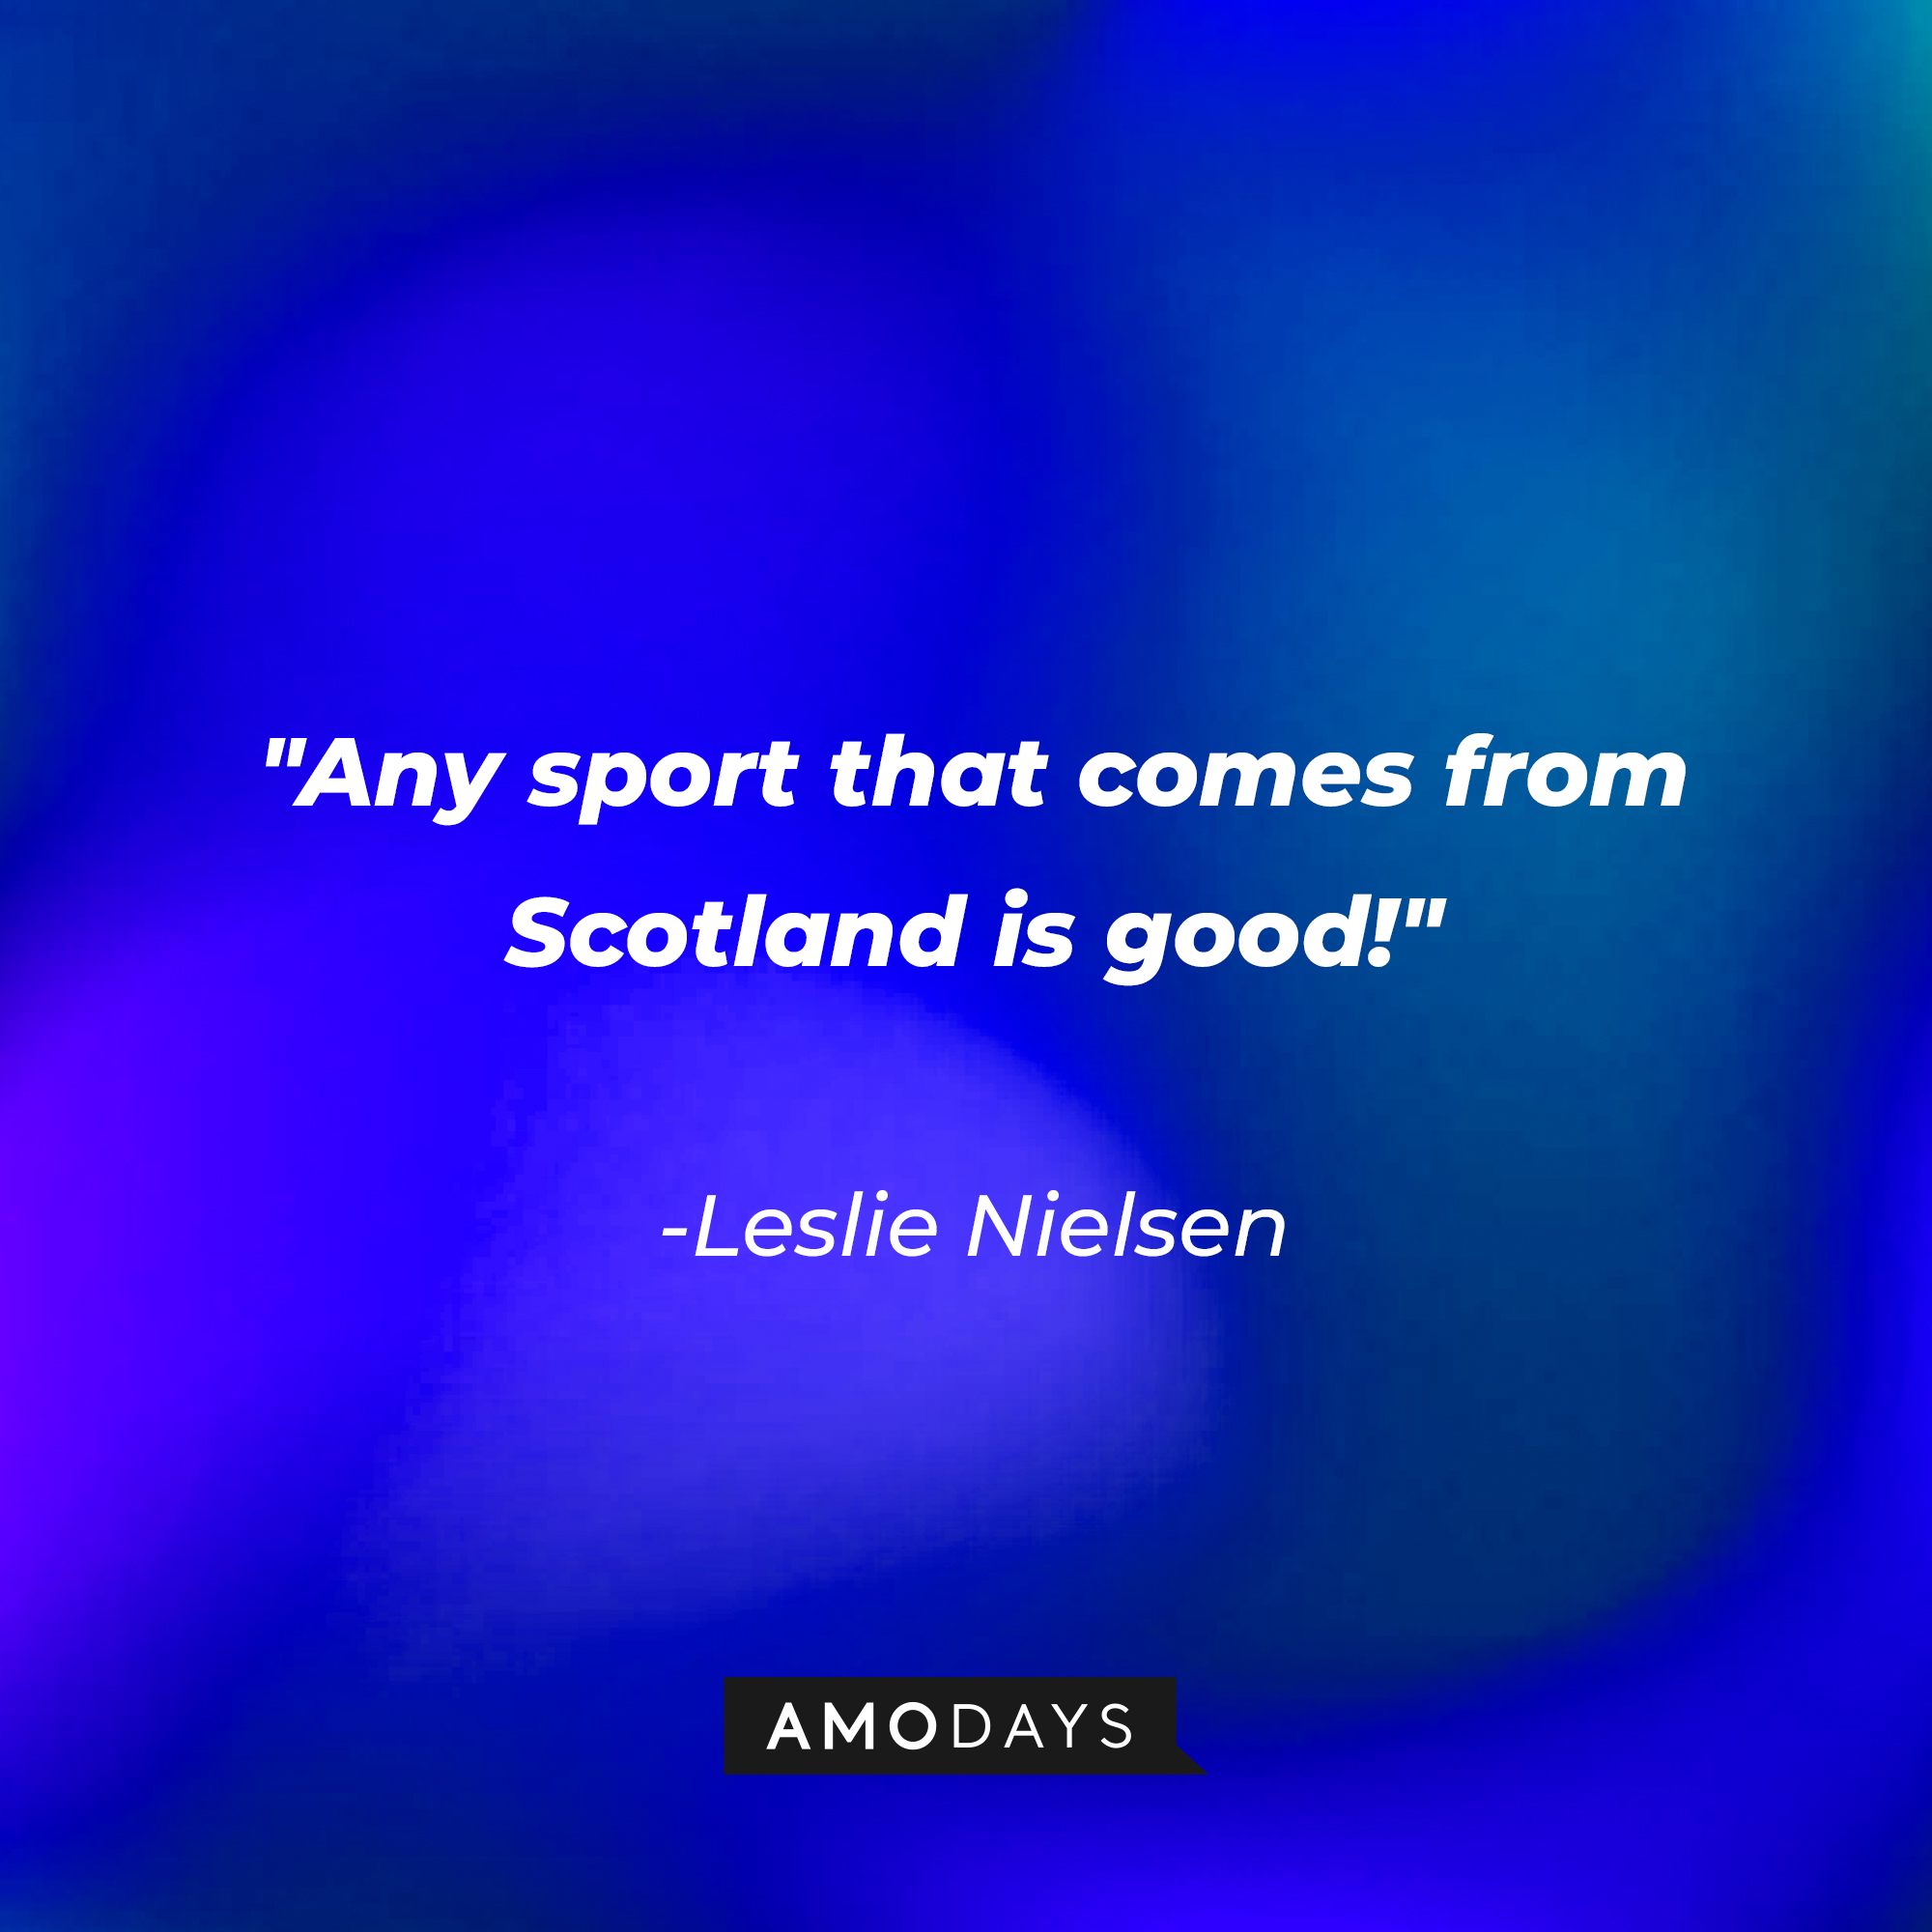 Leslie Nielsen's quote: "Any sport that comes from Scotland is good!" | Source: Amodays